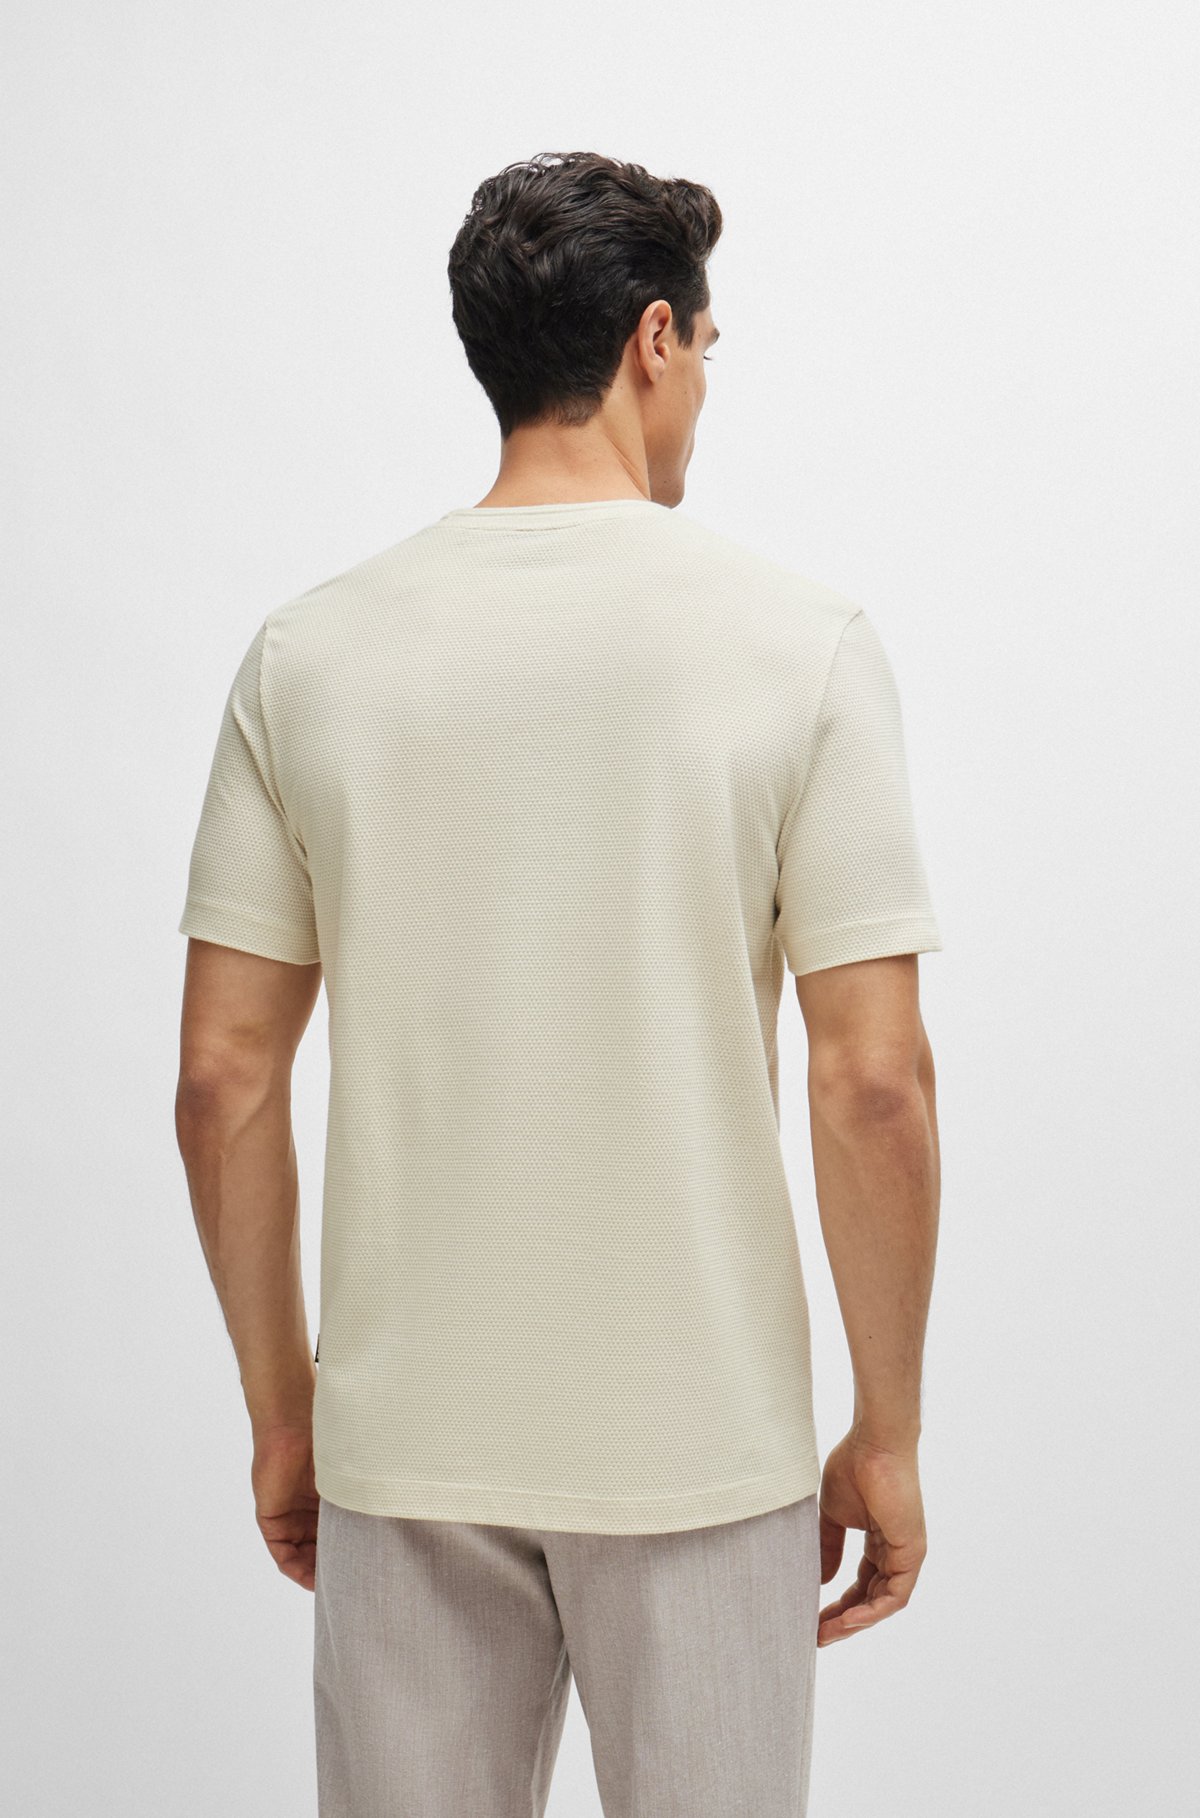 T-shirt with bubble-jacquard structure, White